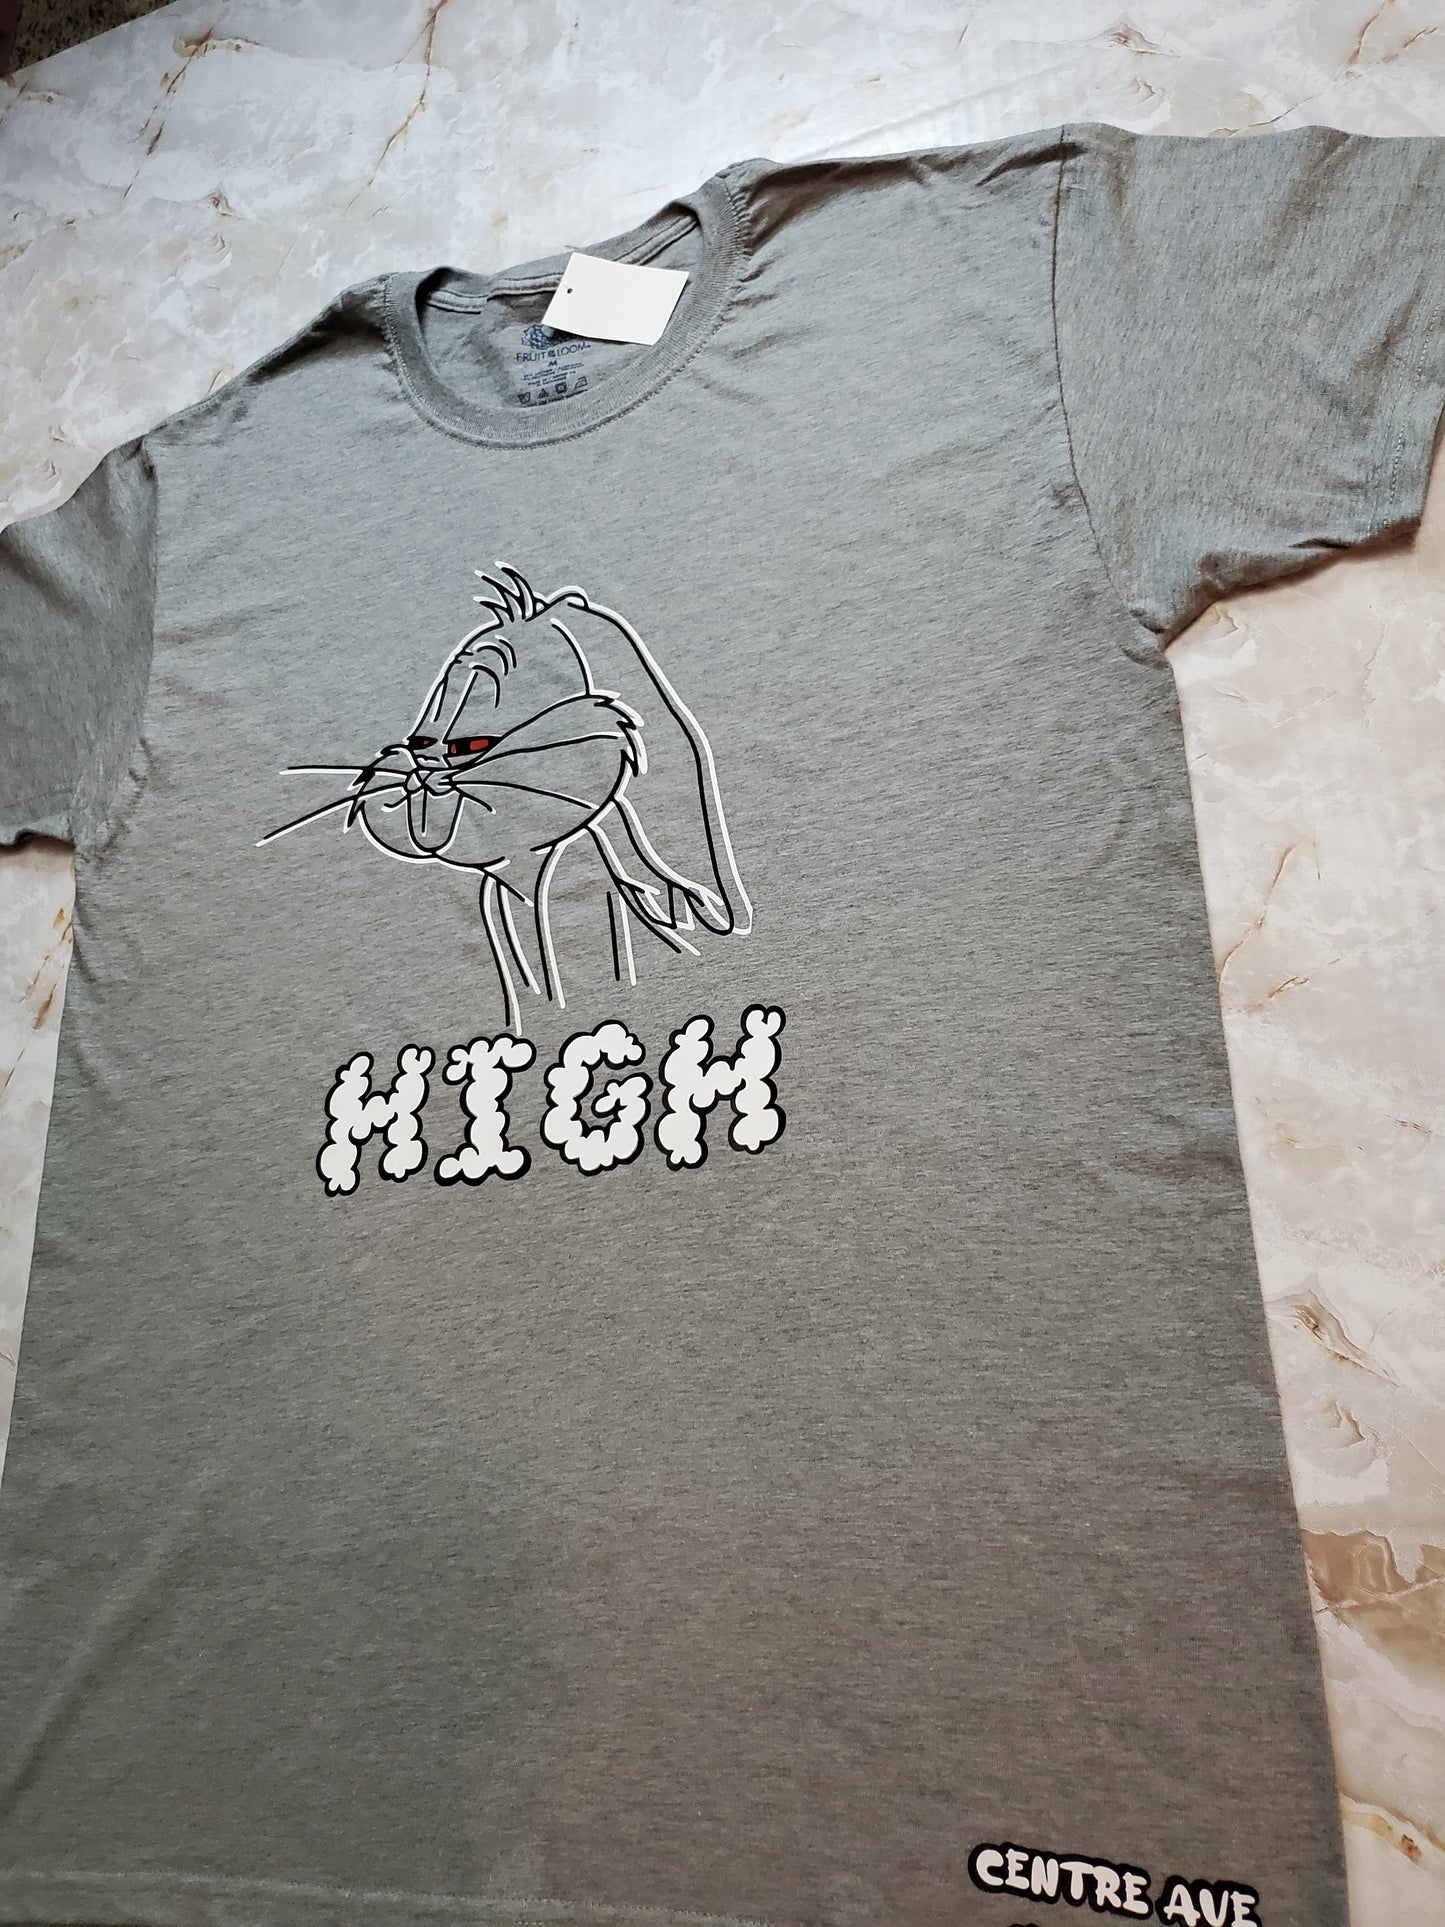 HIGH T-Shirt - Centre Ave Clothing Co.